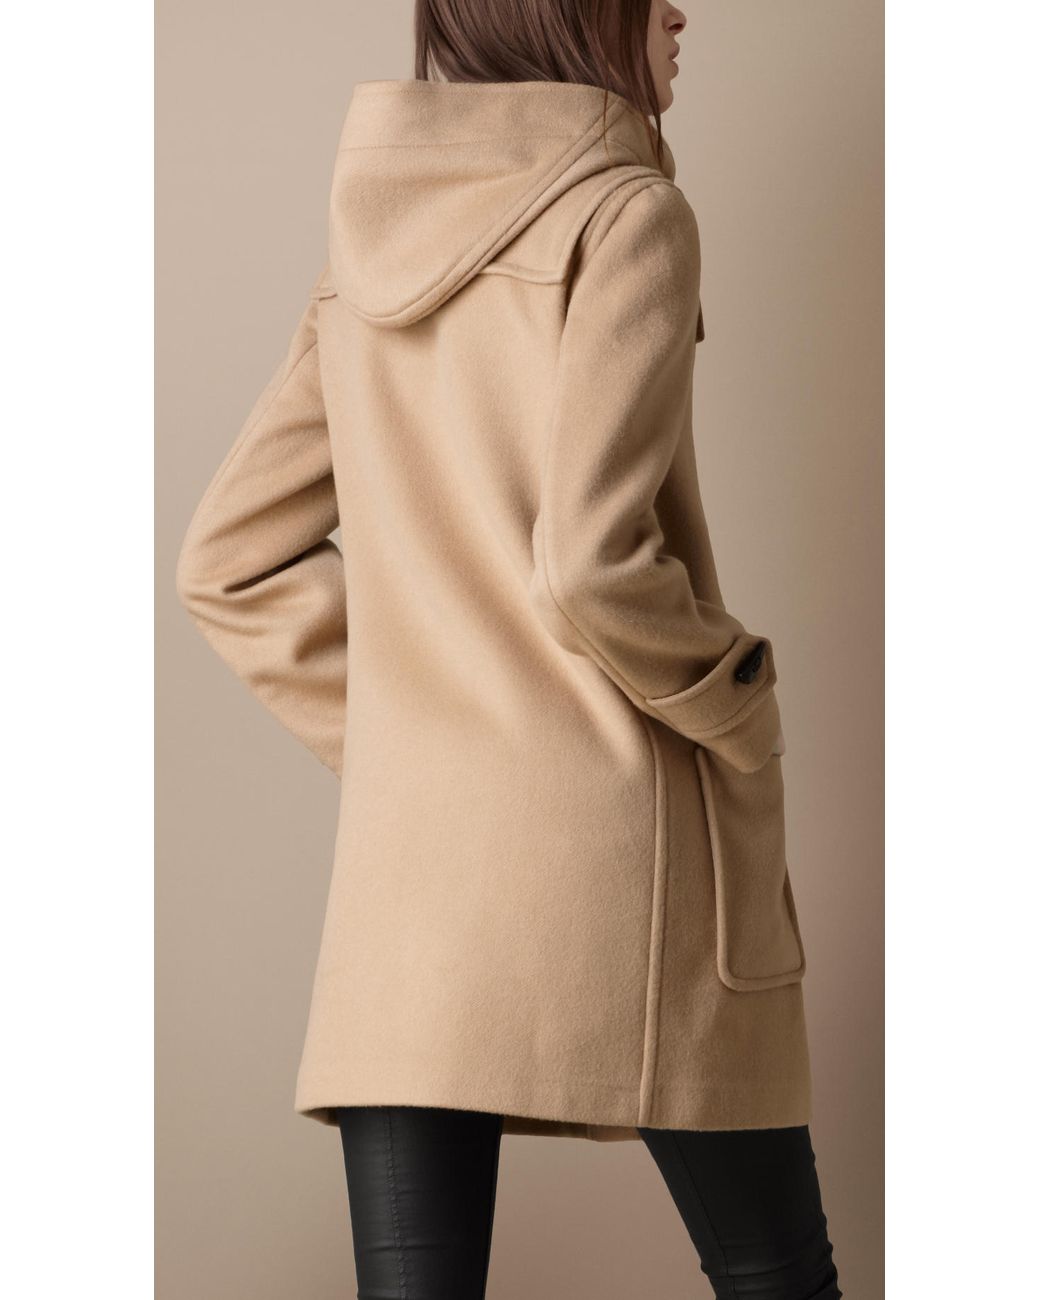 Burberry Brit Check Lined Duffle Coat in Natural | Lyst